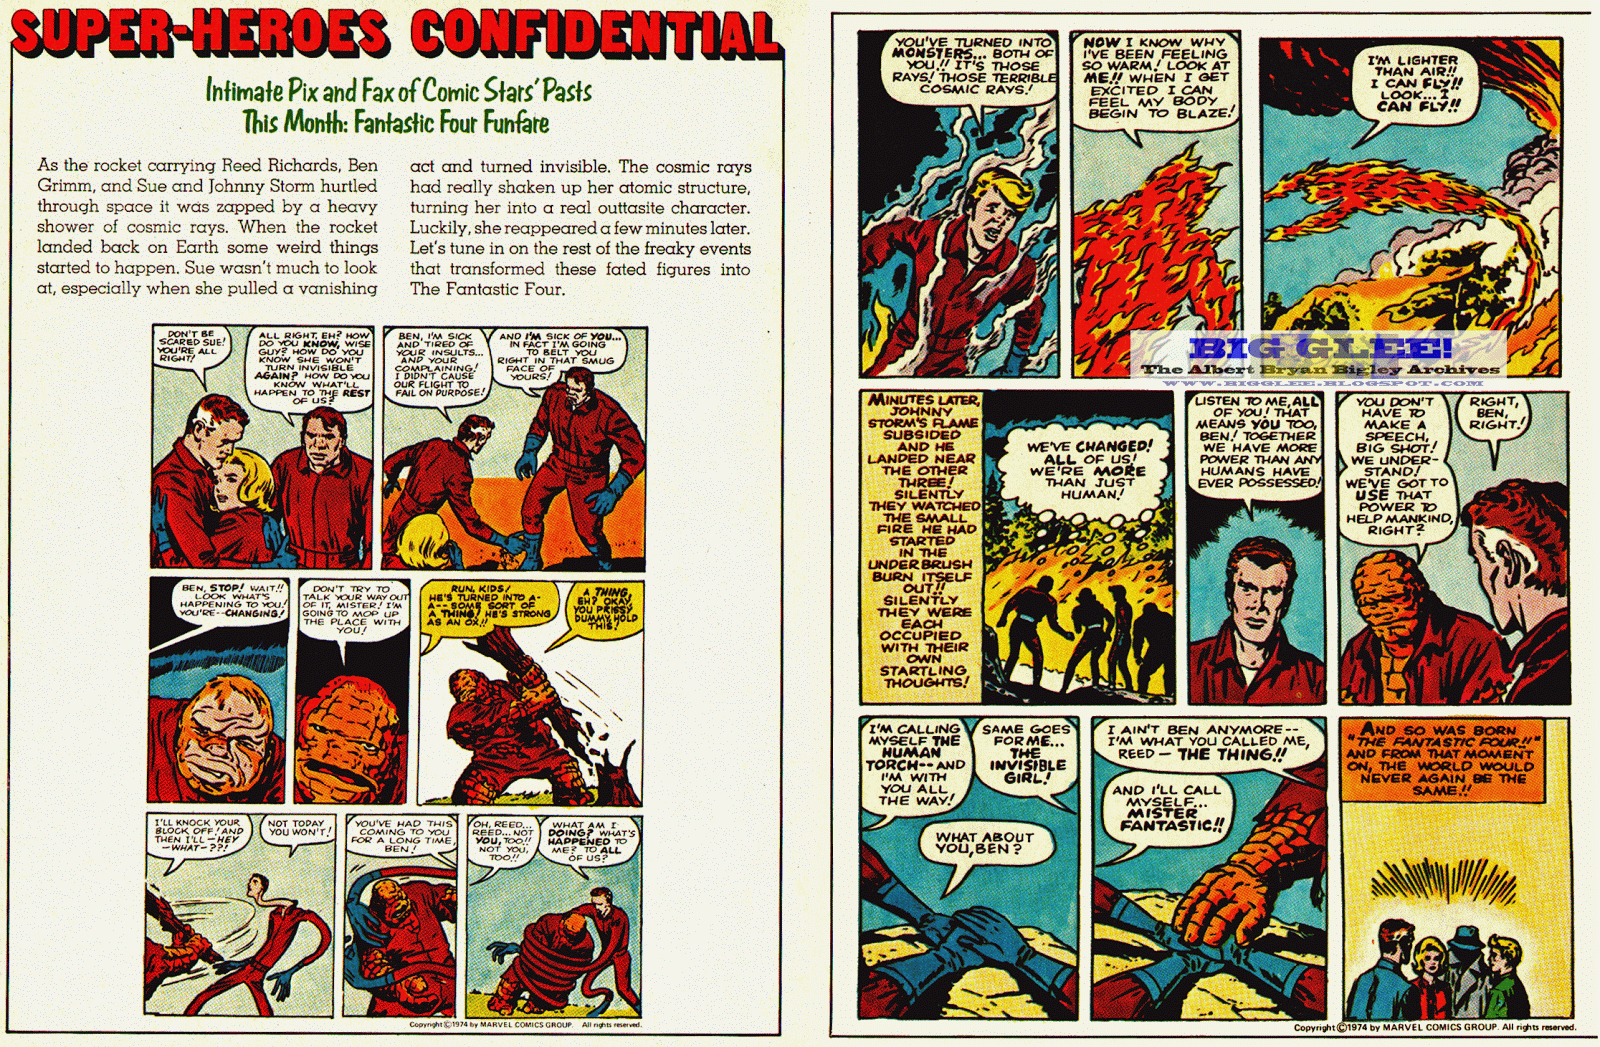 fantastic_four_dynamite_magazine_1961_1974_marvel_comics_thing_invisible_girl_mr_reed_richards_ff_human_torch_jack_kirby_stan_lee_origin_silver_age.gif